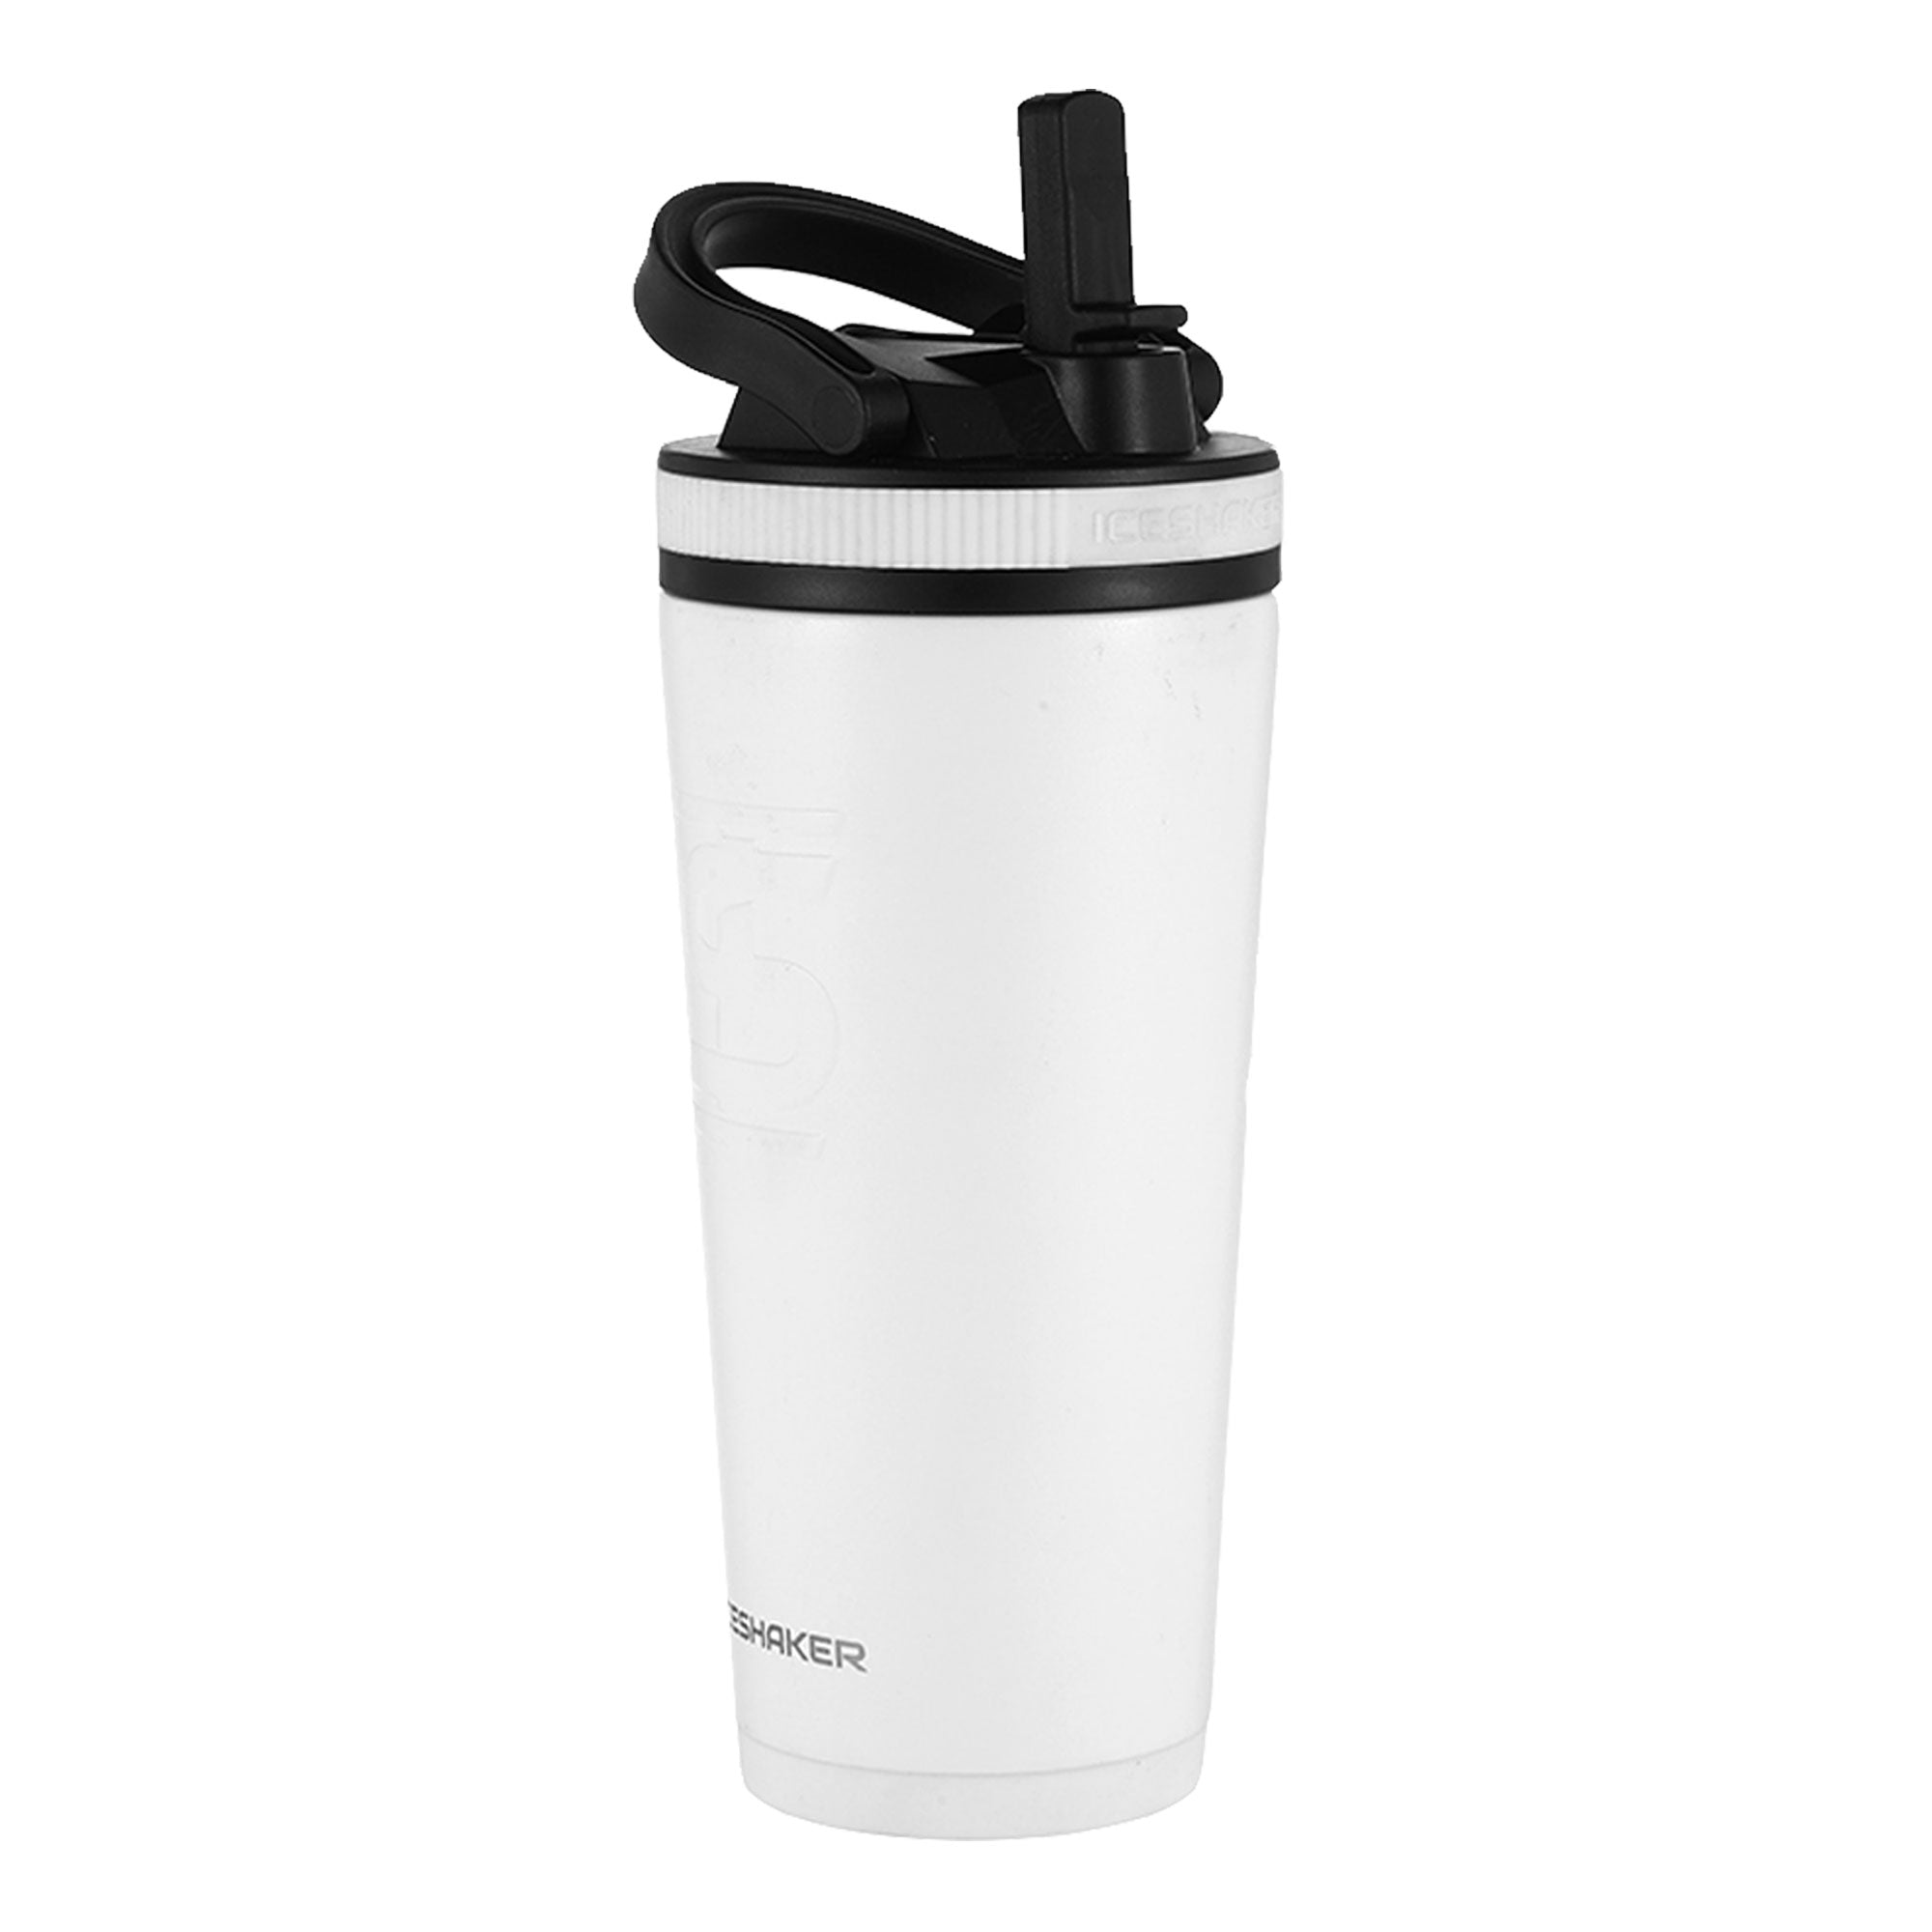 Sports Shaker Bottle For Protein Powder Stainless Steel Thermos